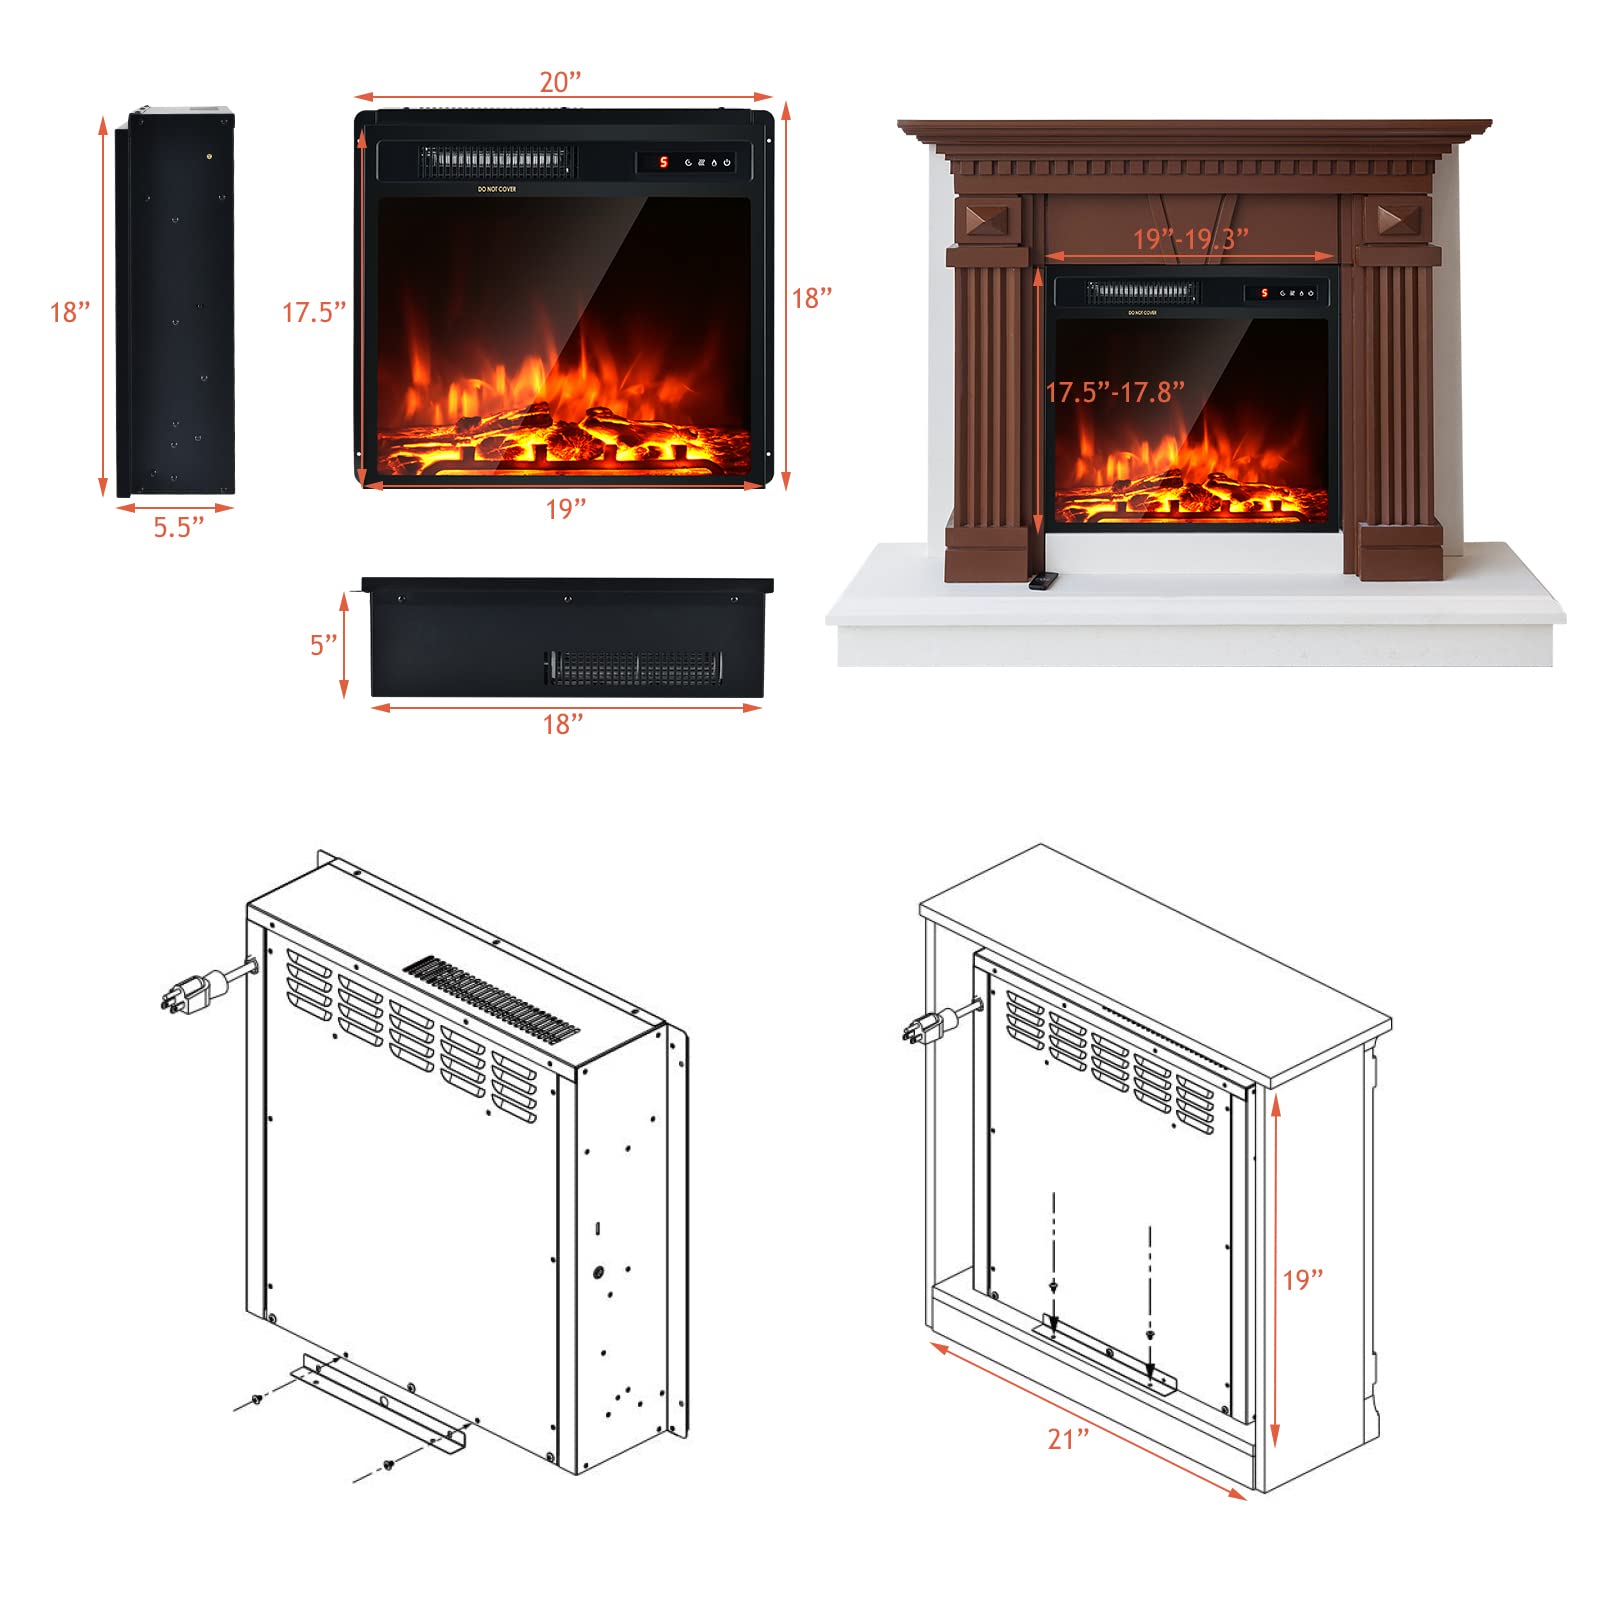 Giantex Recessed and Wall-Mounted Electric Fireplace - Electric Stove Heater